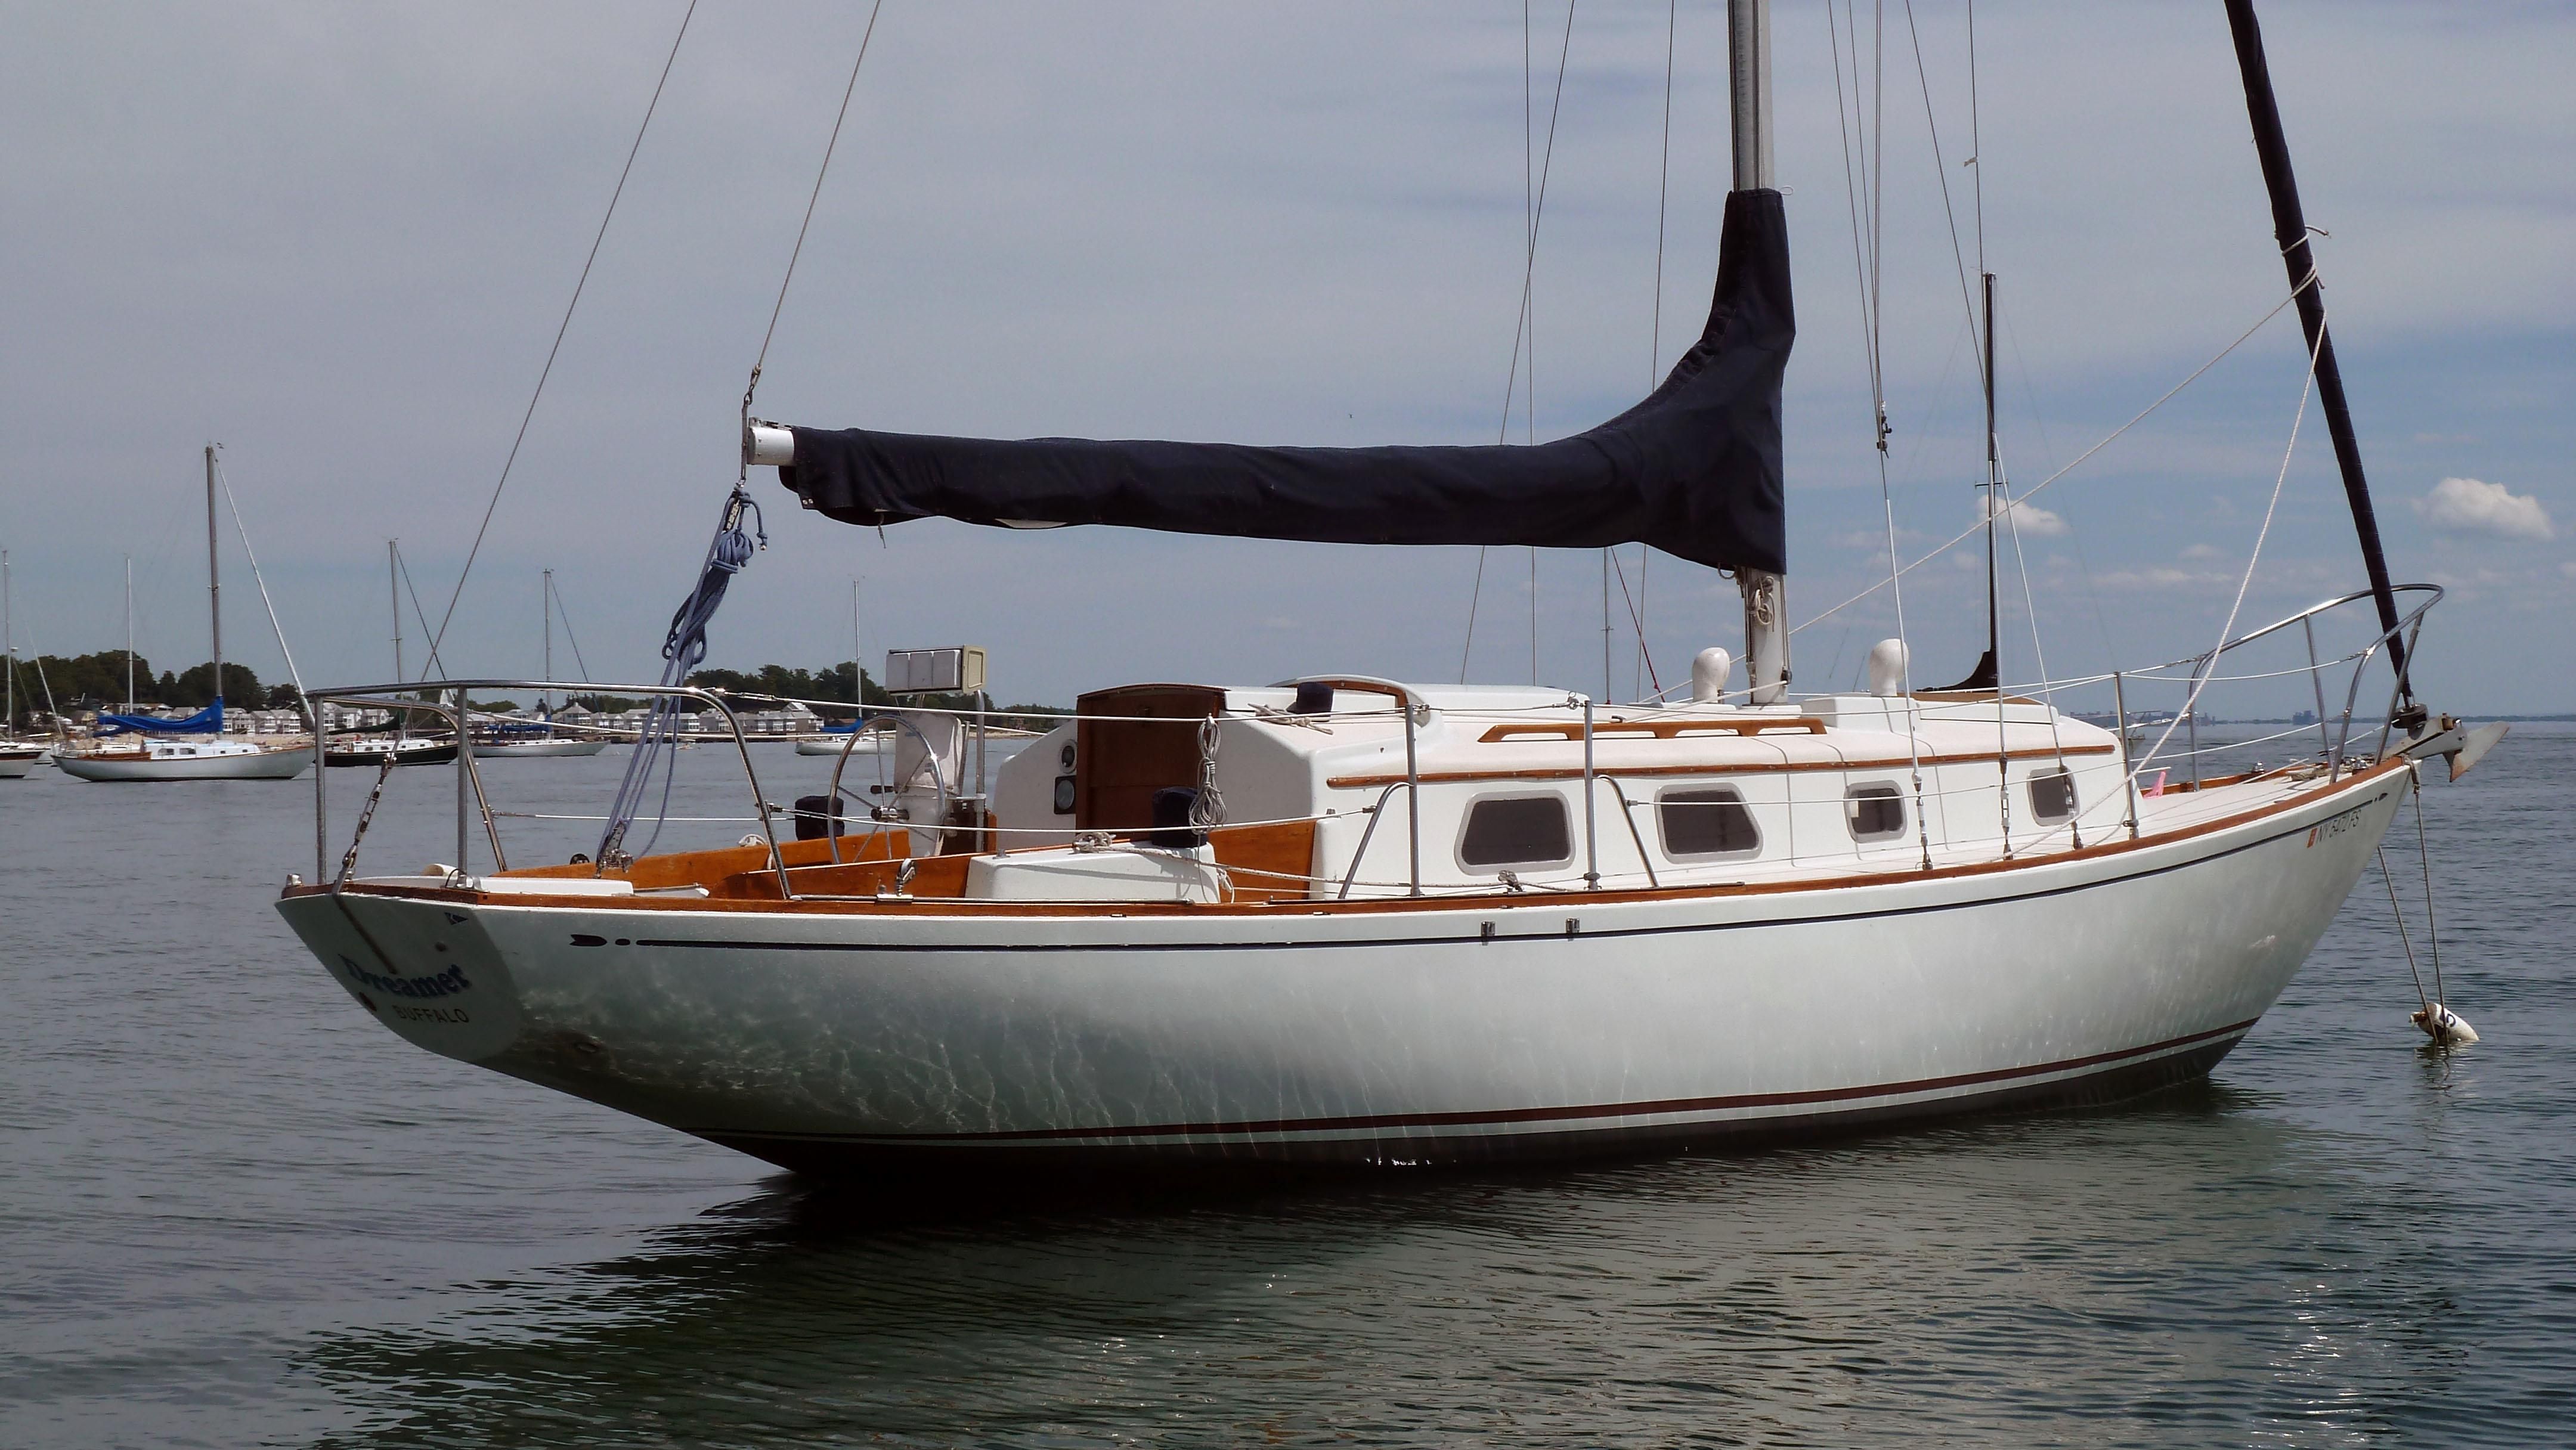 1975 Bristol 32 Sail New And Used Boats For Sale Uk 